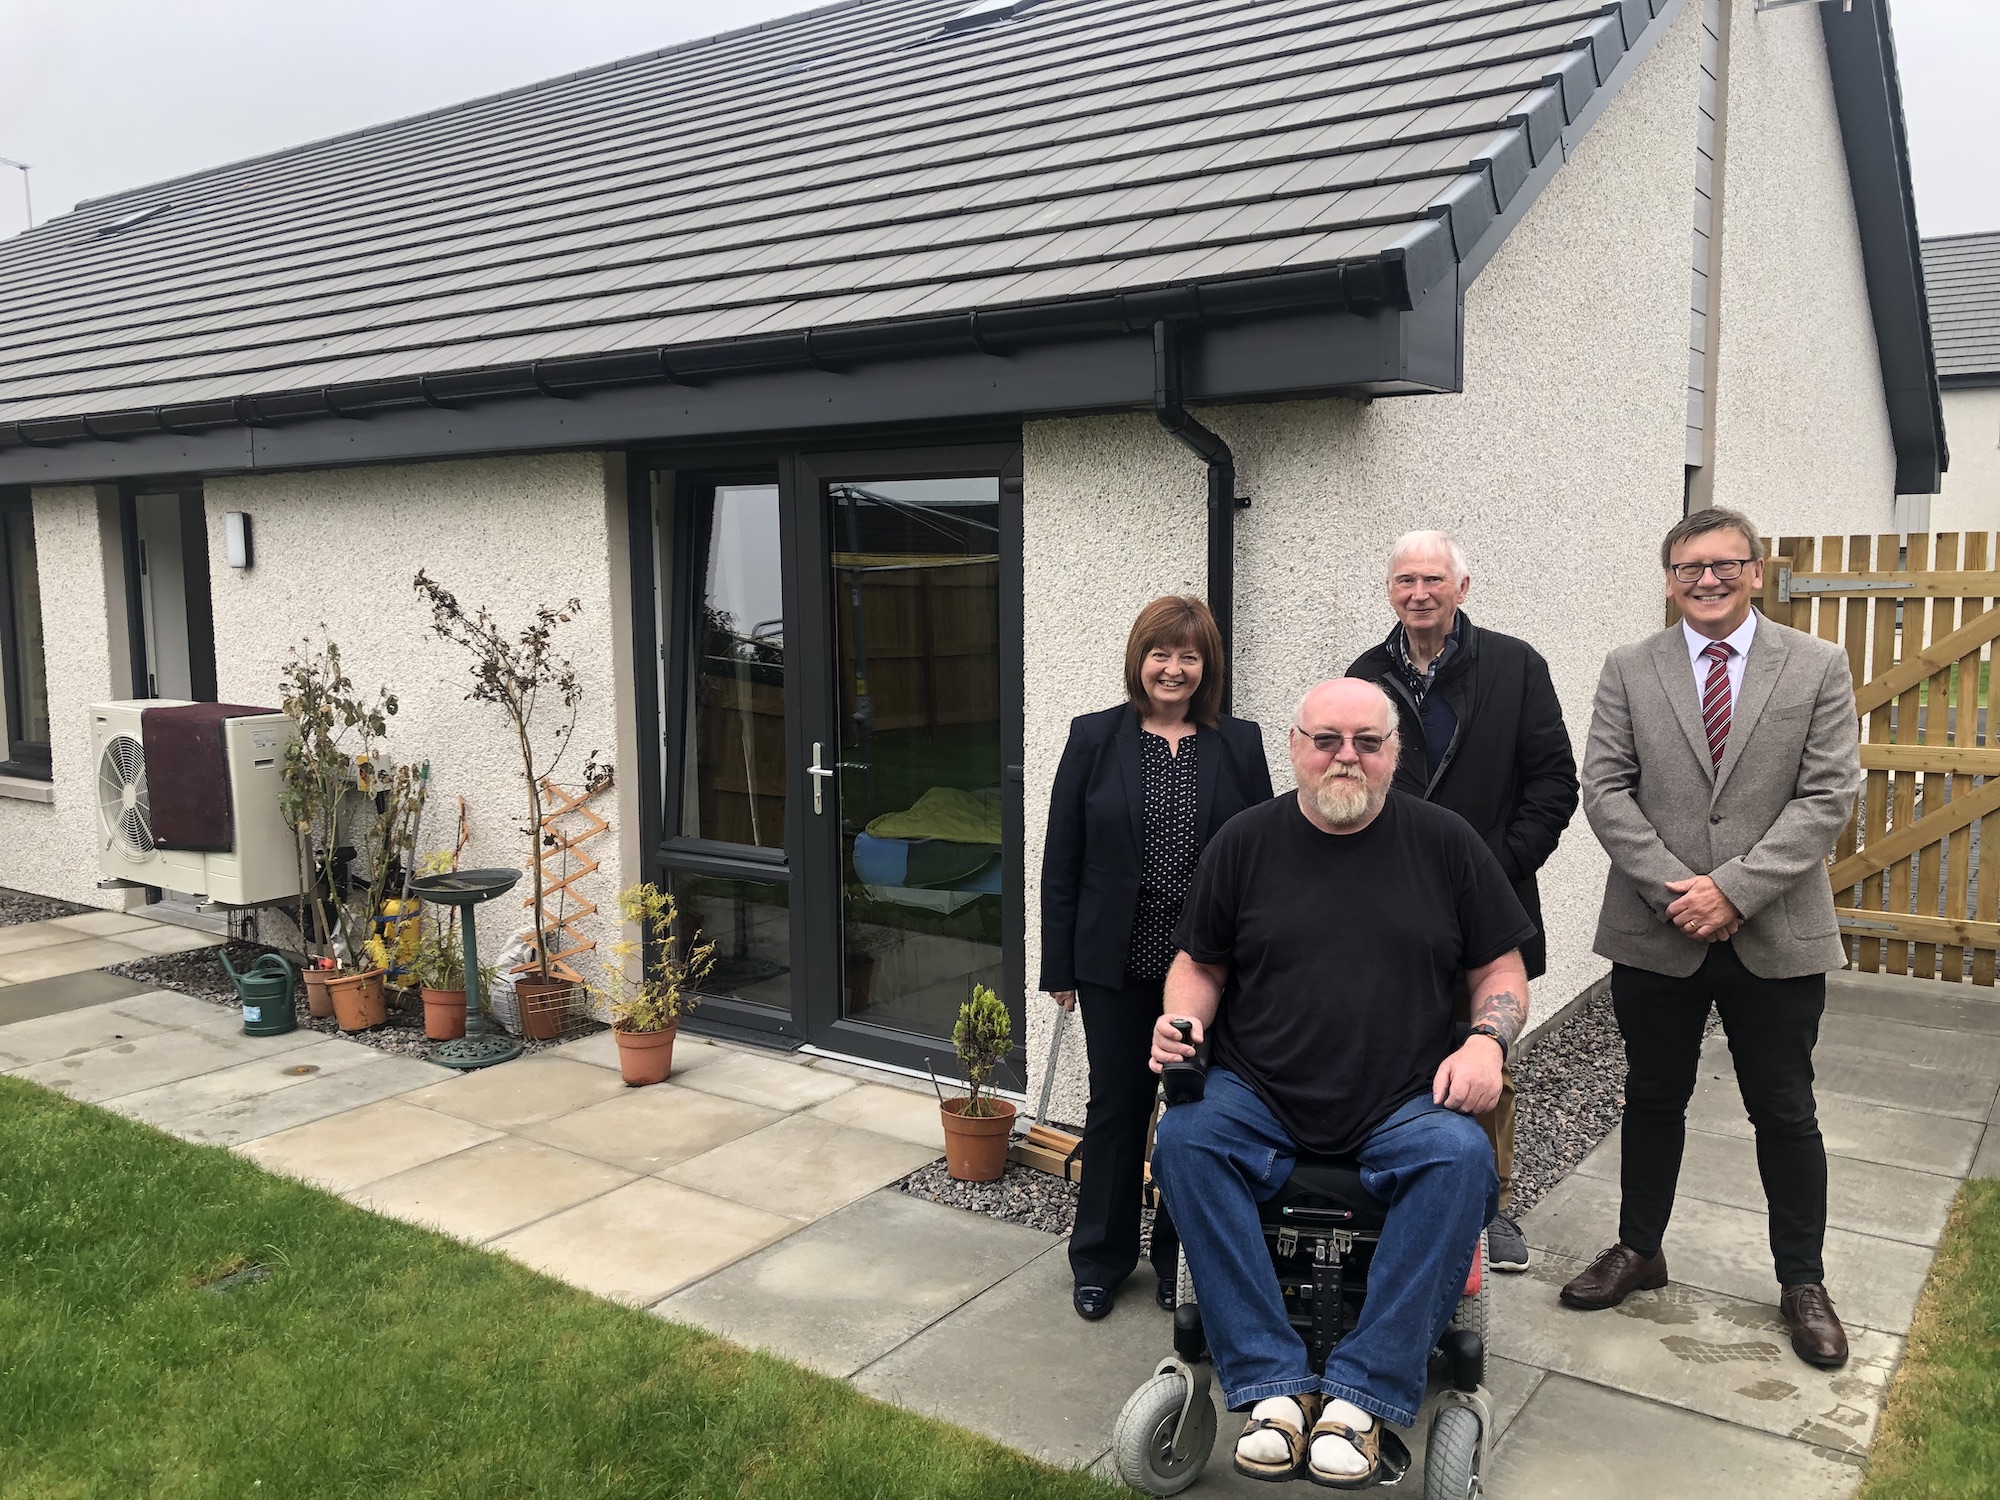 Grampian Housing Association secures £96m fund to meet demand for sustainable homes